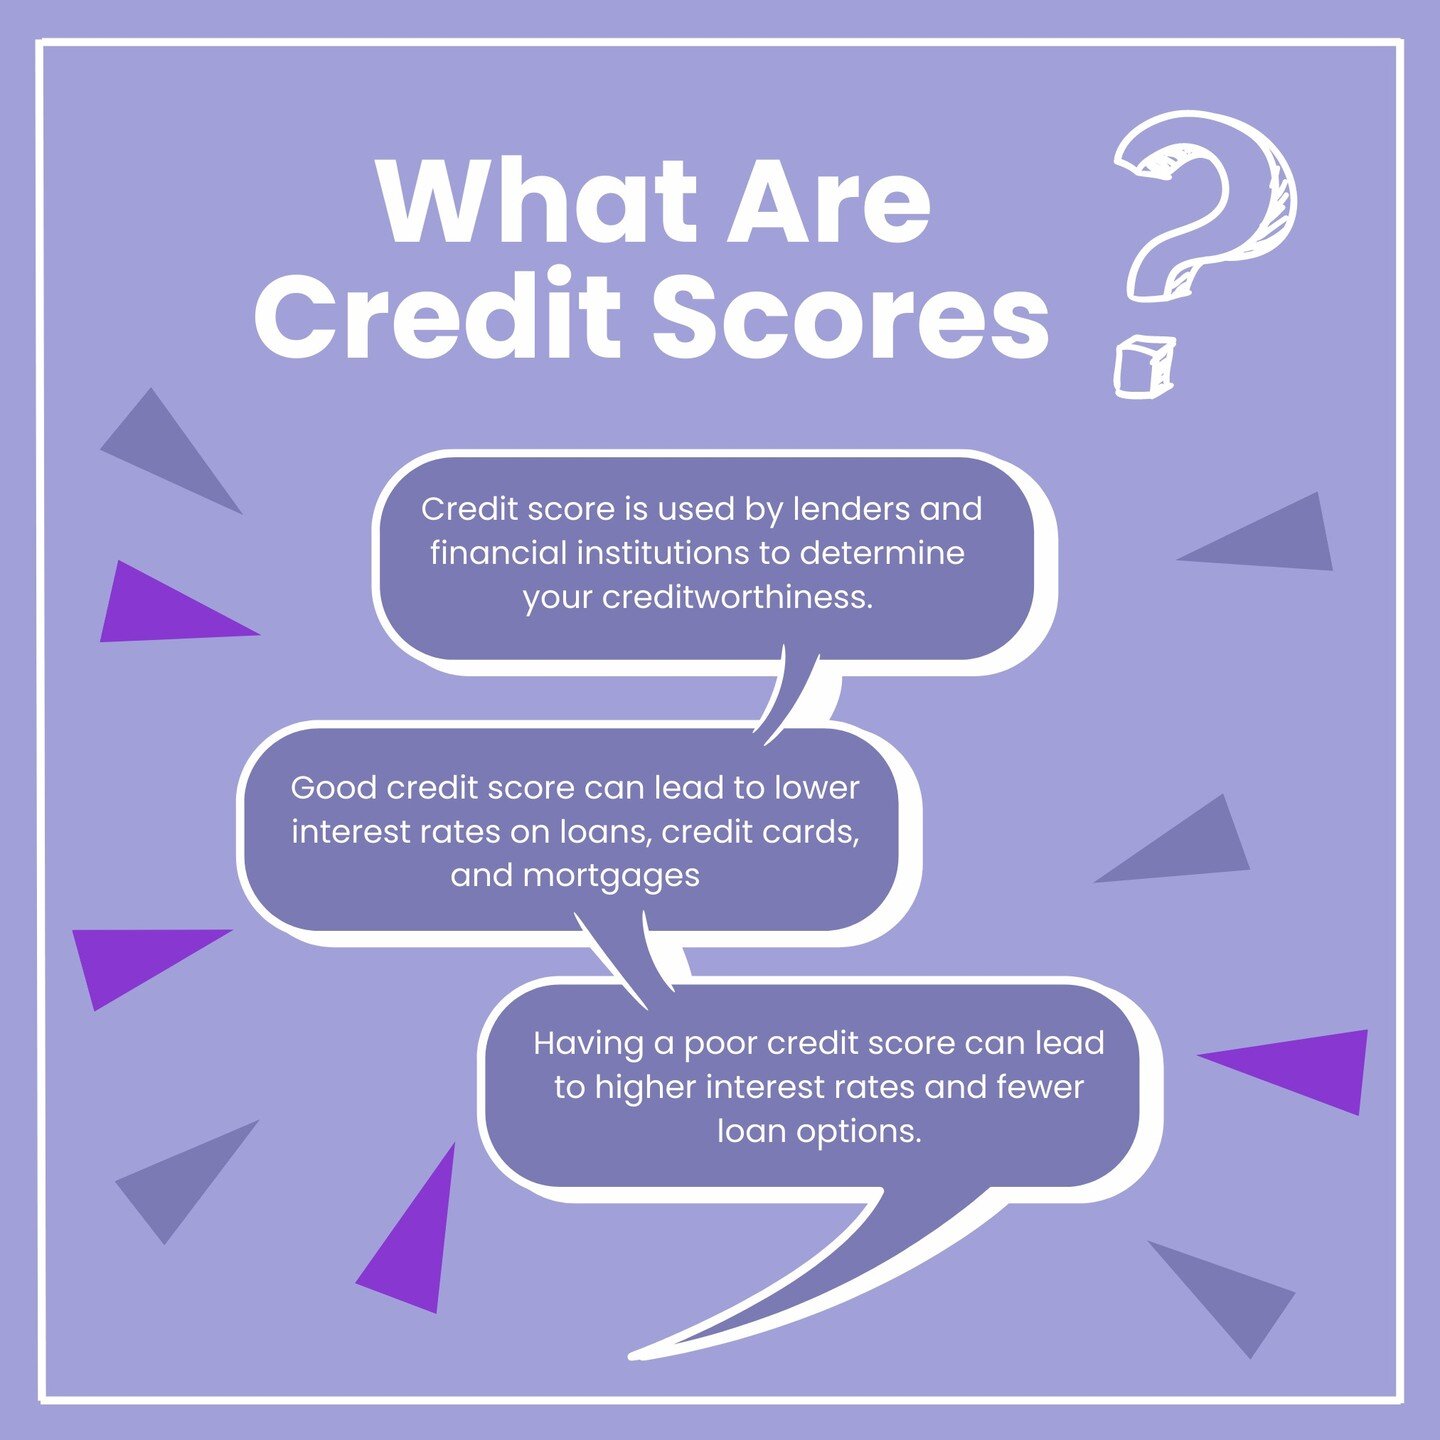 Understanding how credit scores work is essential because it can significantly impact your financial life. Credit scores are used by lenders and financial institutions to assess your creditworthiness. A good credit score can help you secure lower int